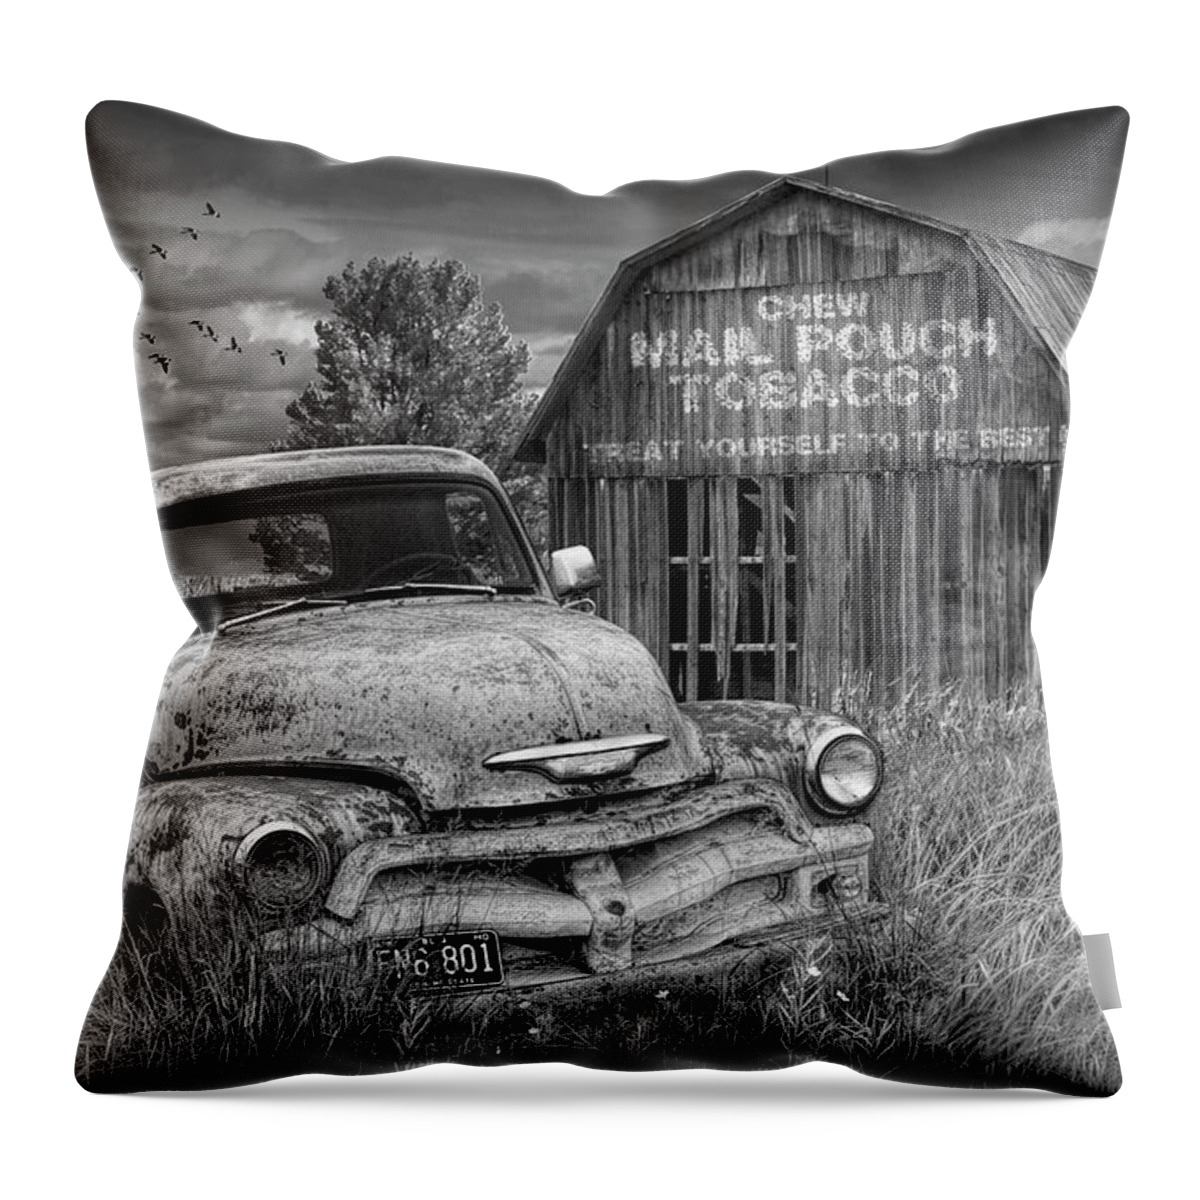 Chevy Throw Pillow featuring the photograph Black and White of Rusted Chevy Pickup Truck in a Rural Landscape by a Mail Pouch Tobacco Barn by Randall Nyhof